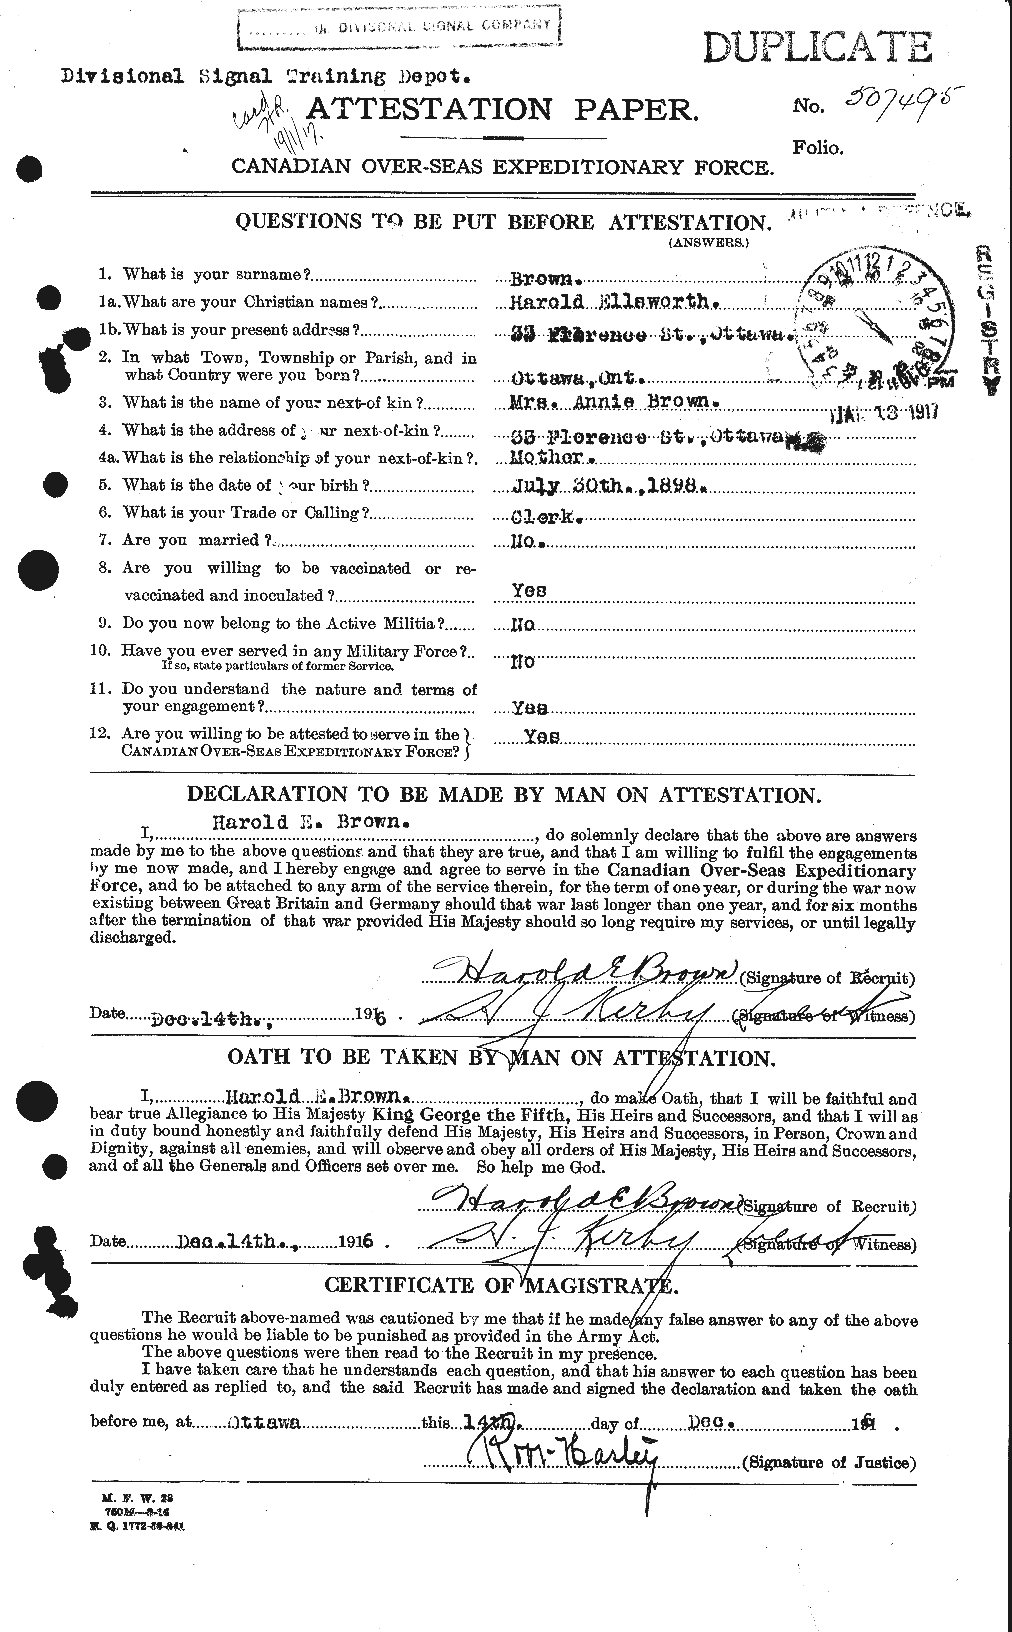 Personnel Records of the First World War - CEF 265354a